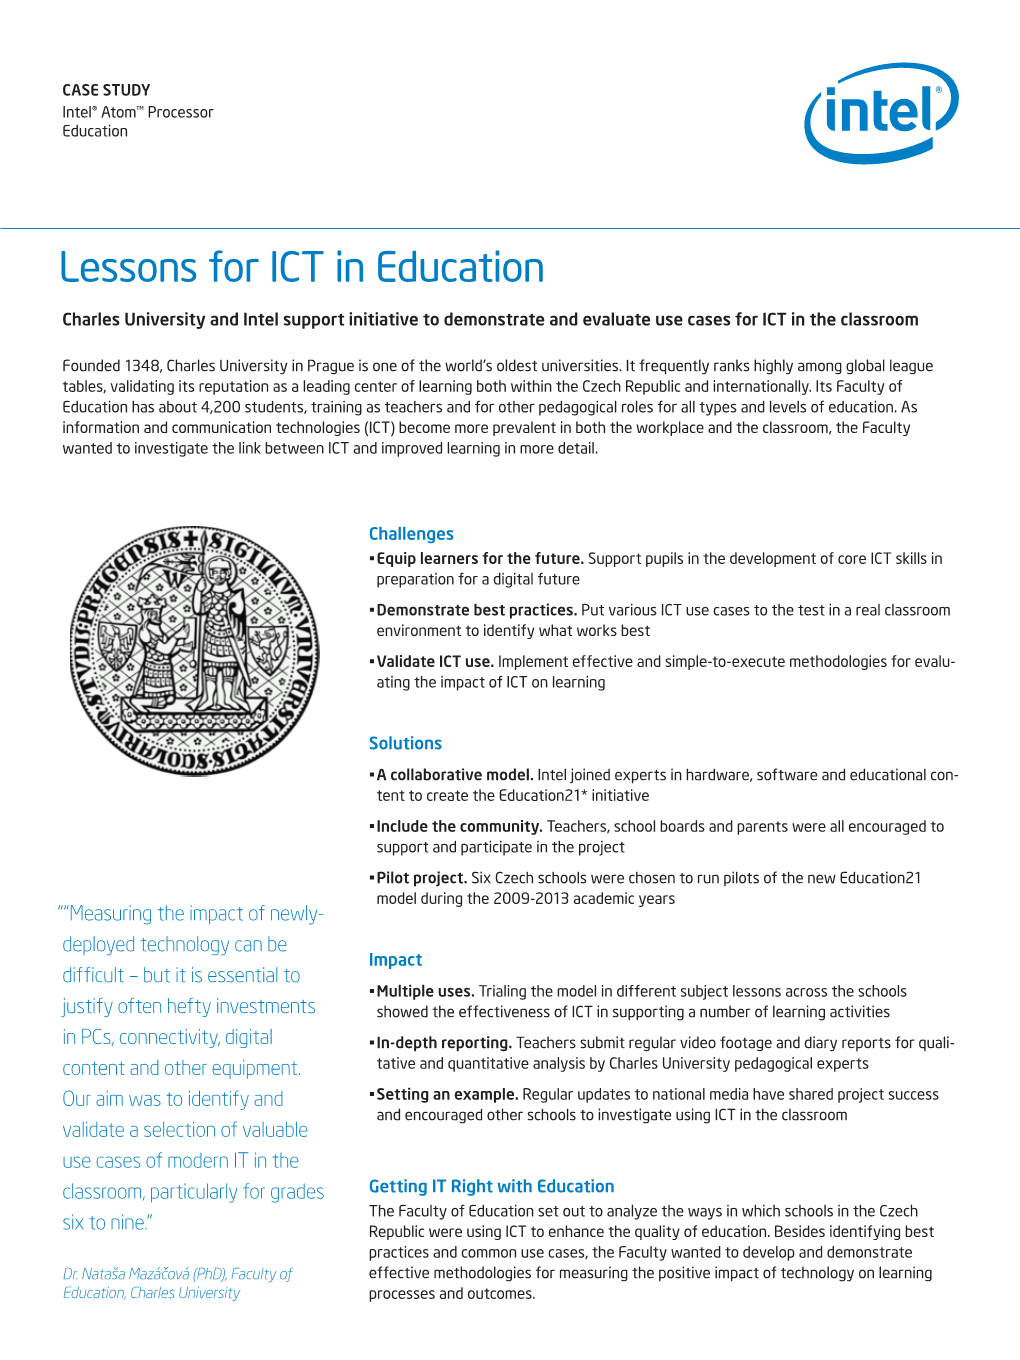 Charles University and Intel Support Initiative to Demonstrate and Evaluate Use Cases for ICT in the Classroom